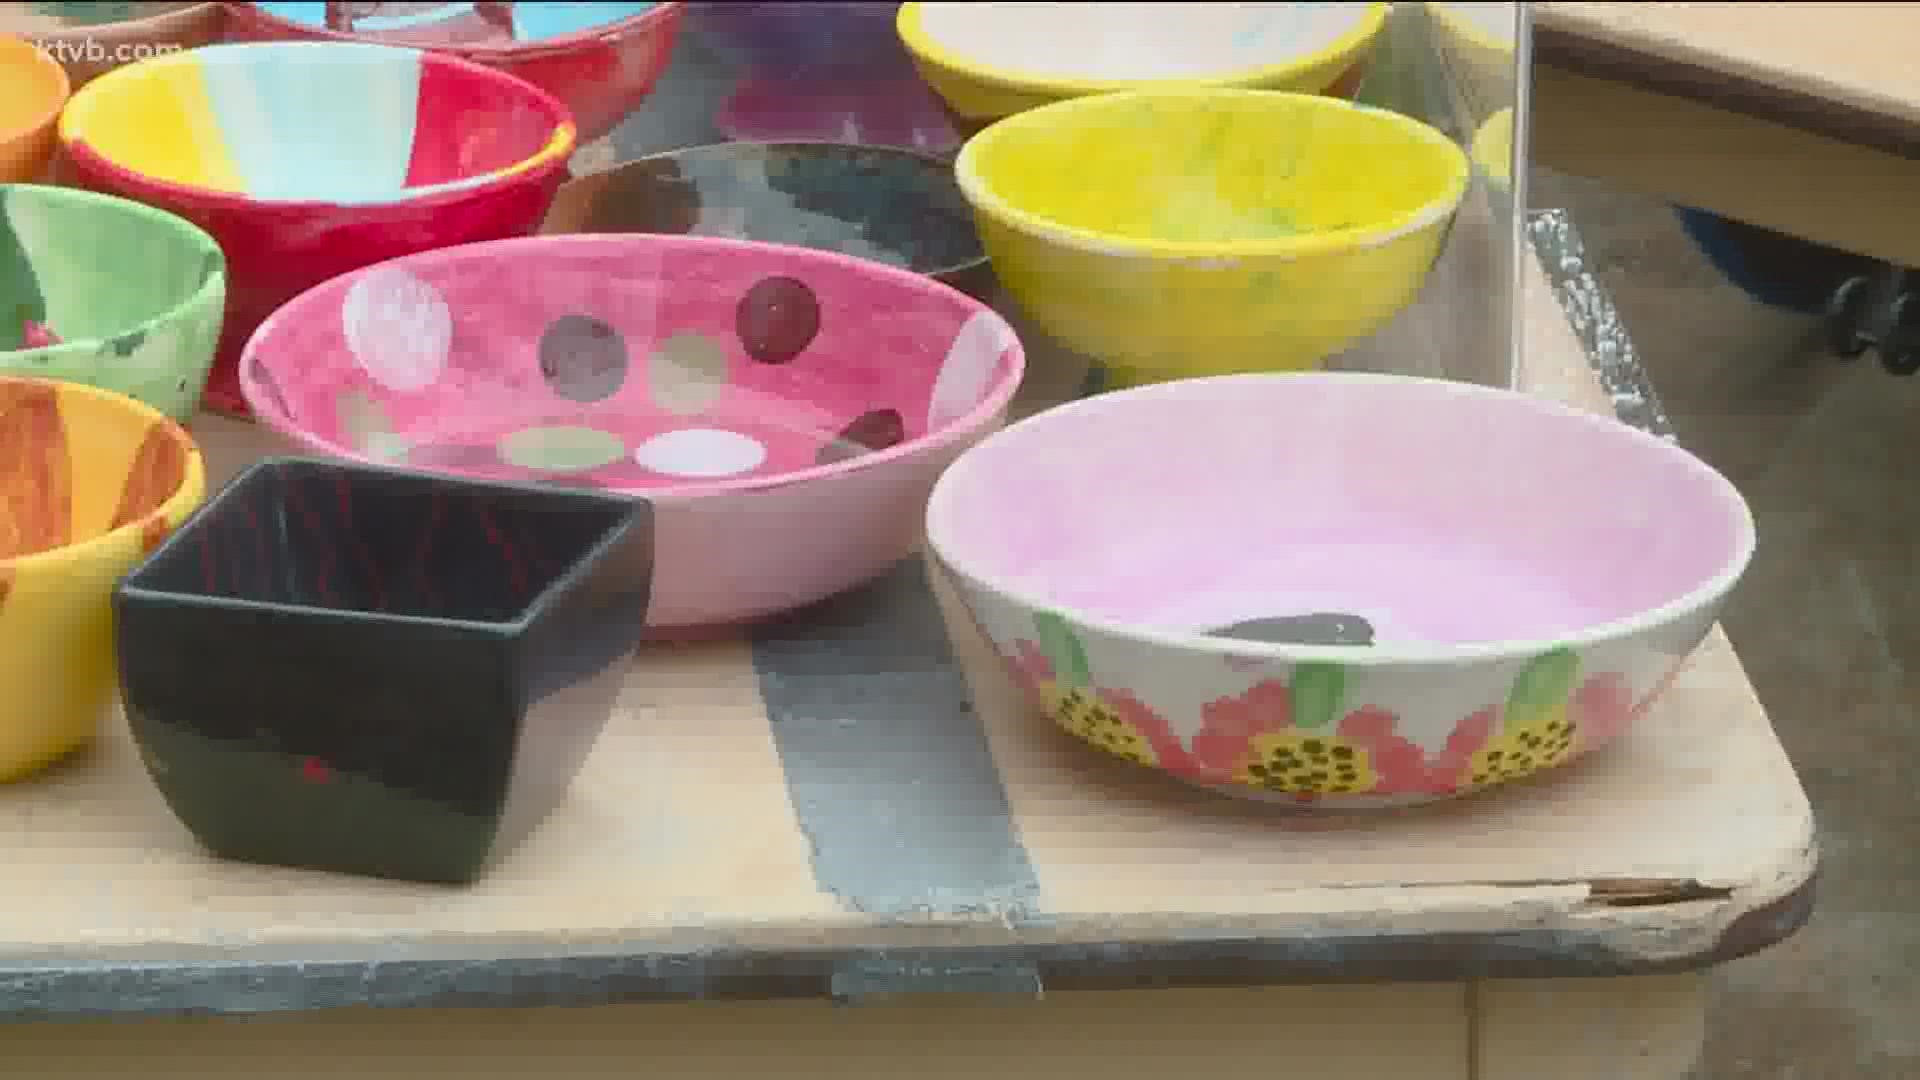 People buy a hand-painted bowl and the money goes to the Idaho Foodbank.